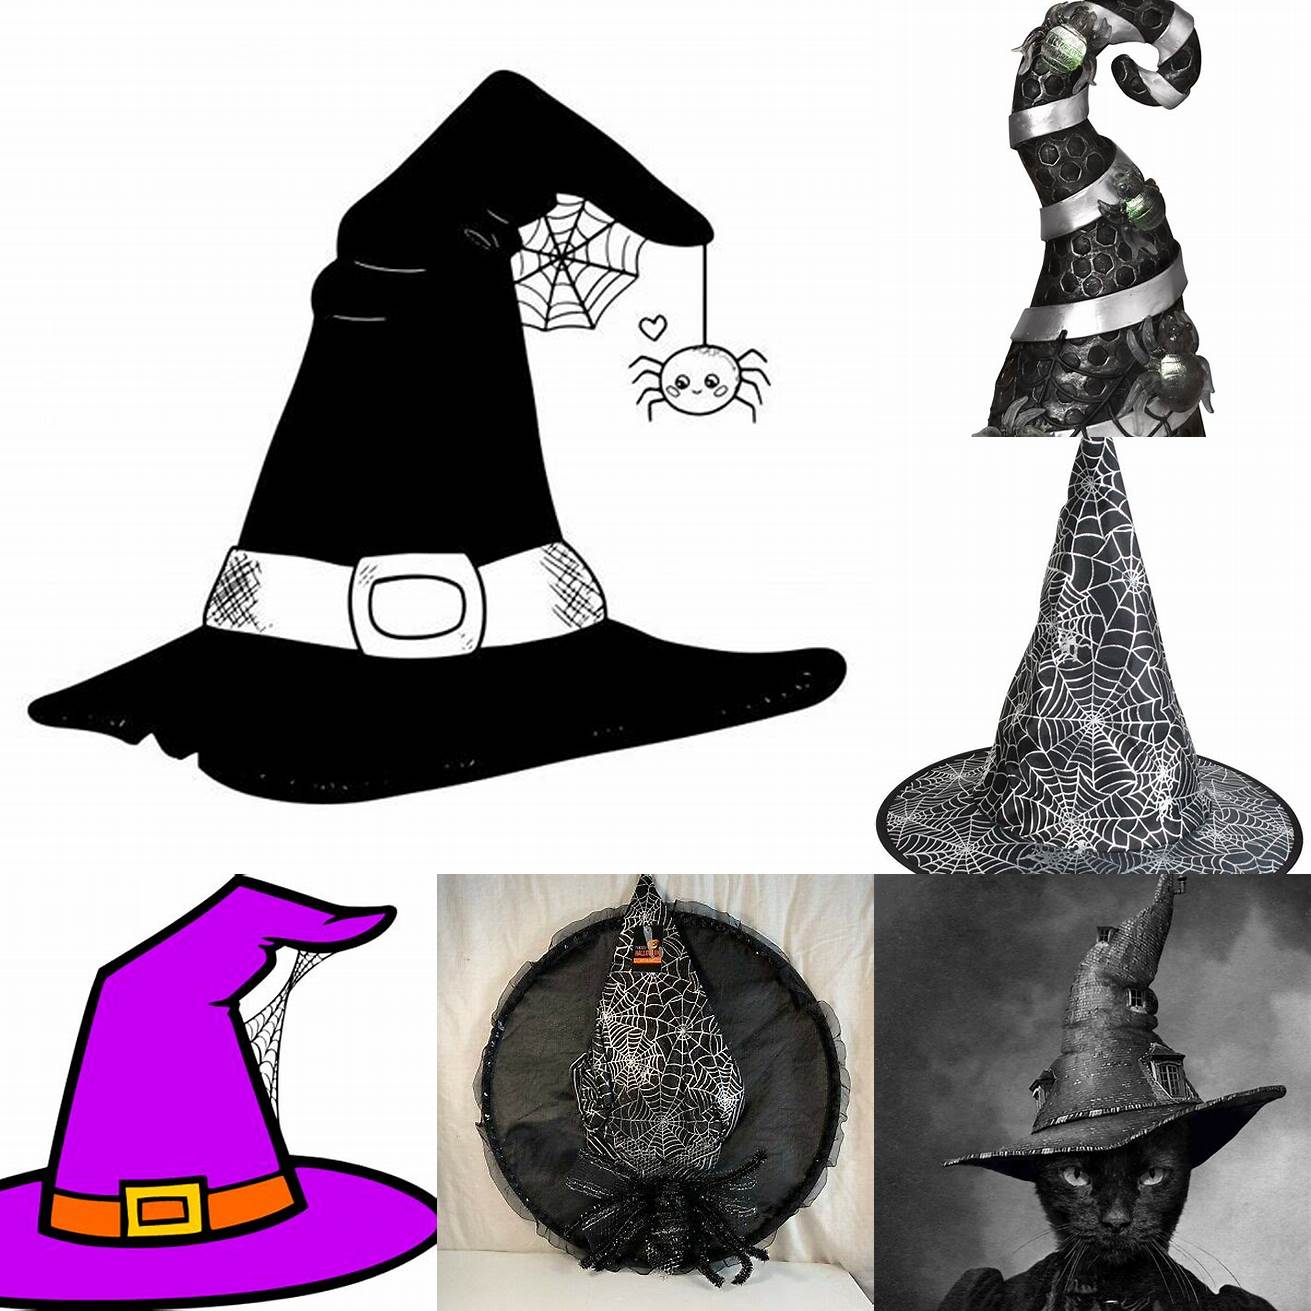 A black witch hat with a spider web design